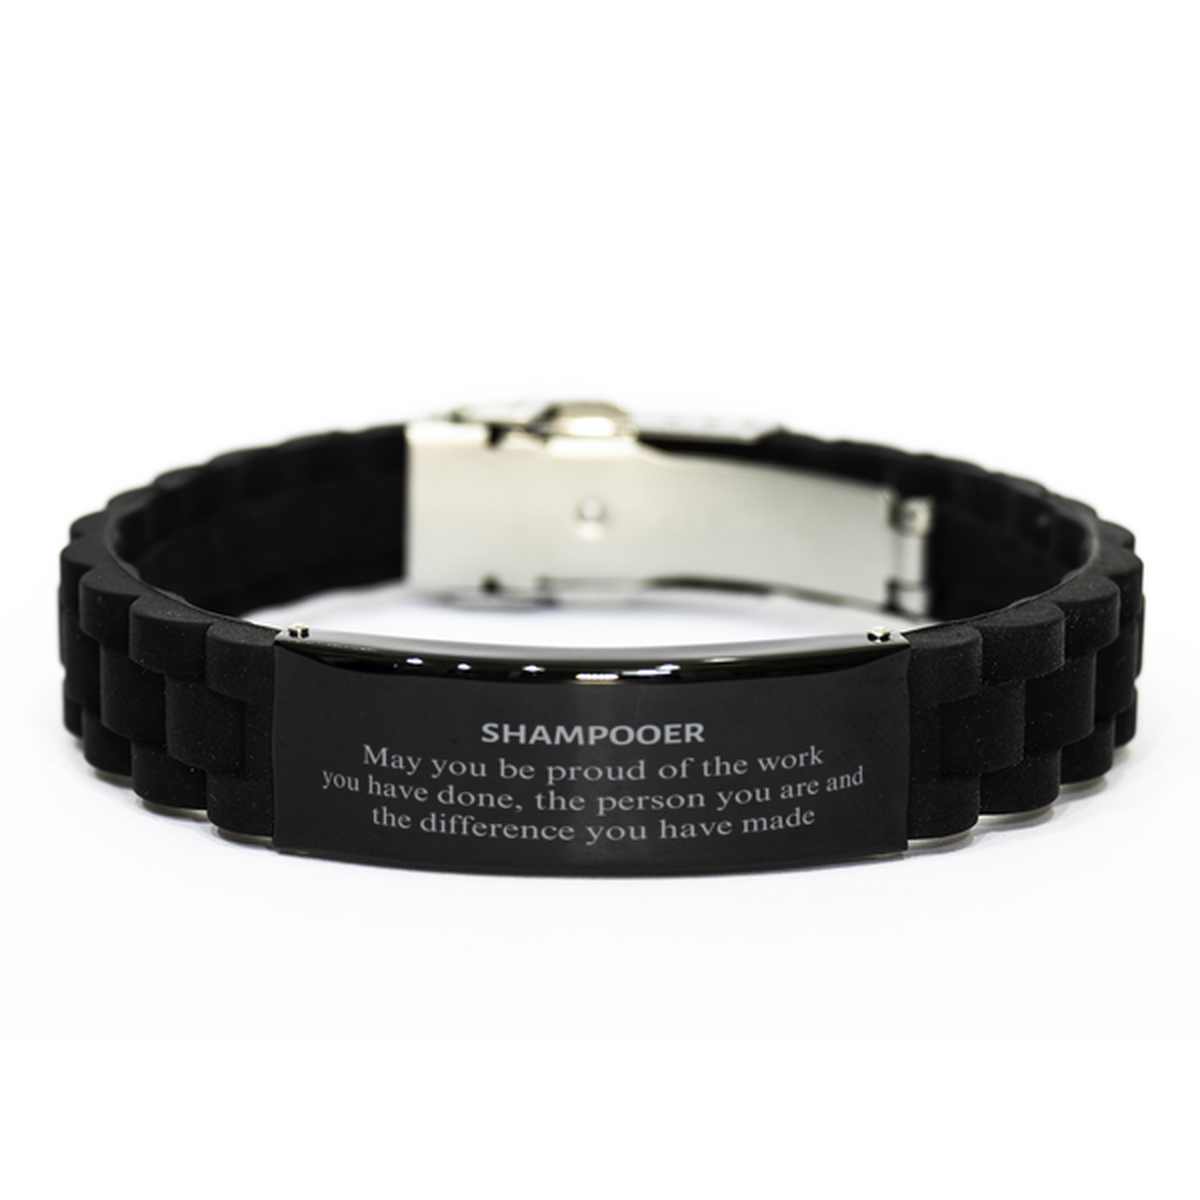 Shampooer May you be proud of the work you have done, Retirement Shampooer Black Glidelock Clasp Bracelet for Colleague Appreciation Gifts Amazing for Shampooer